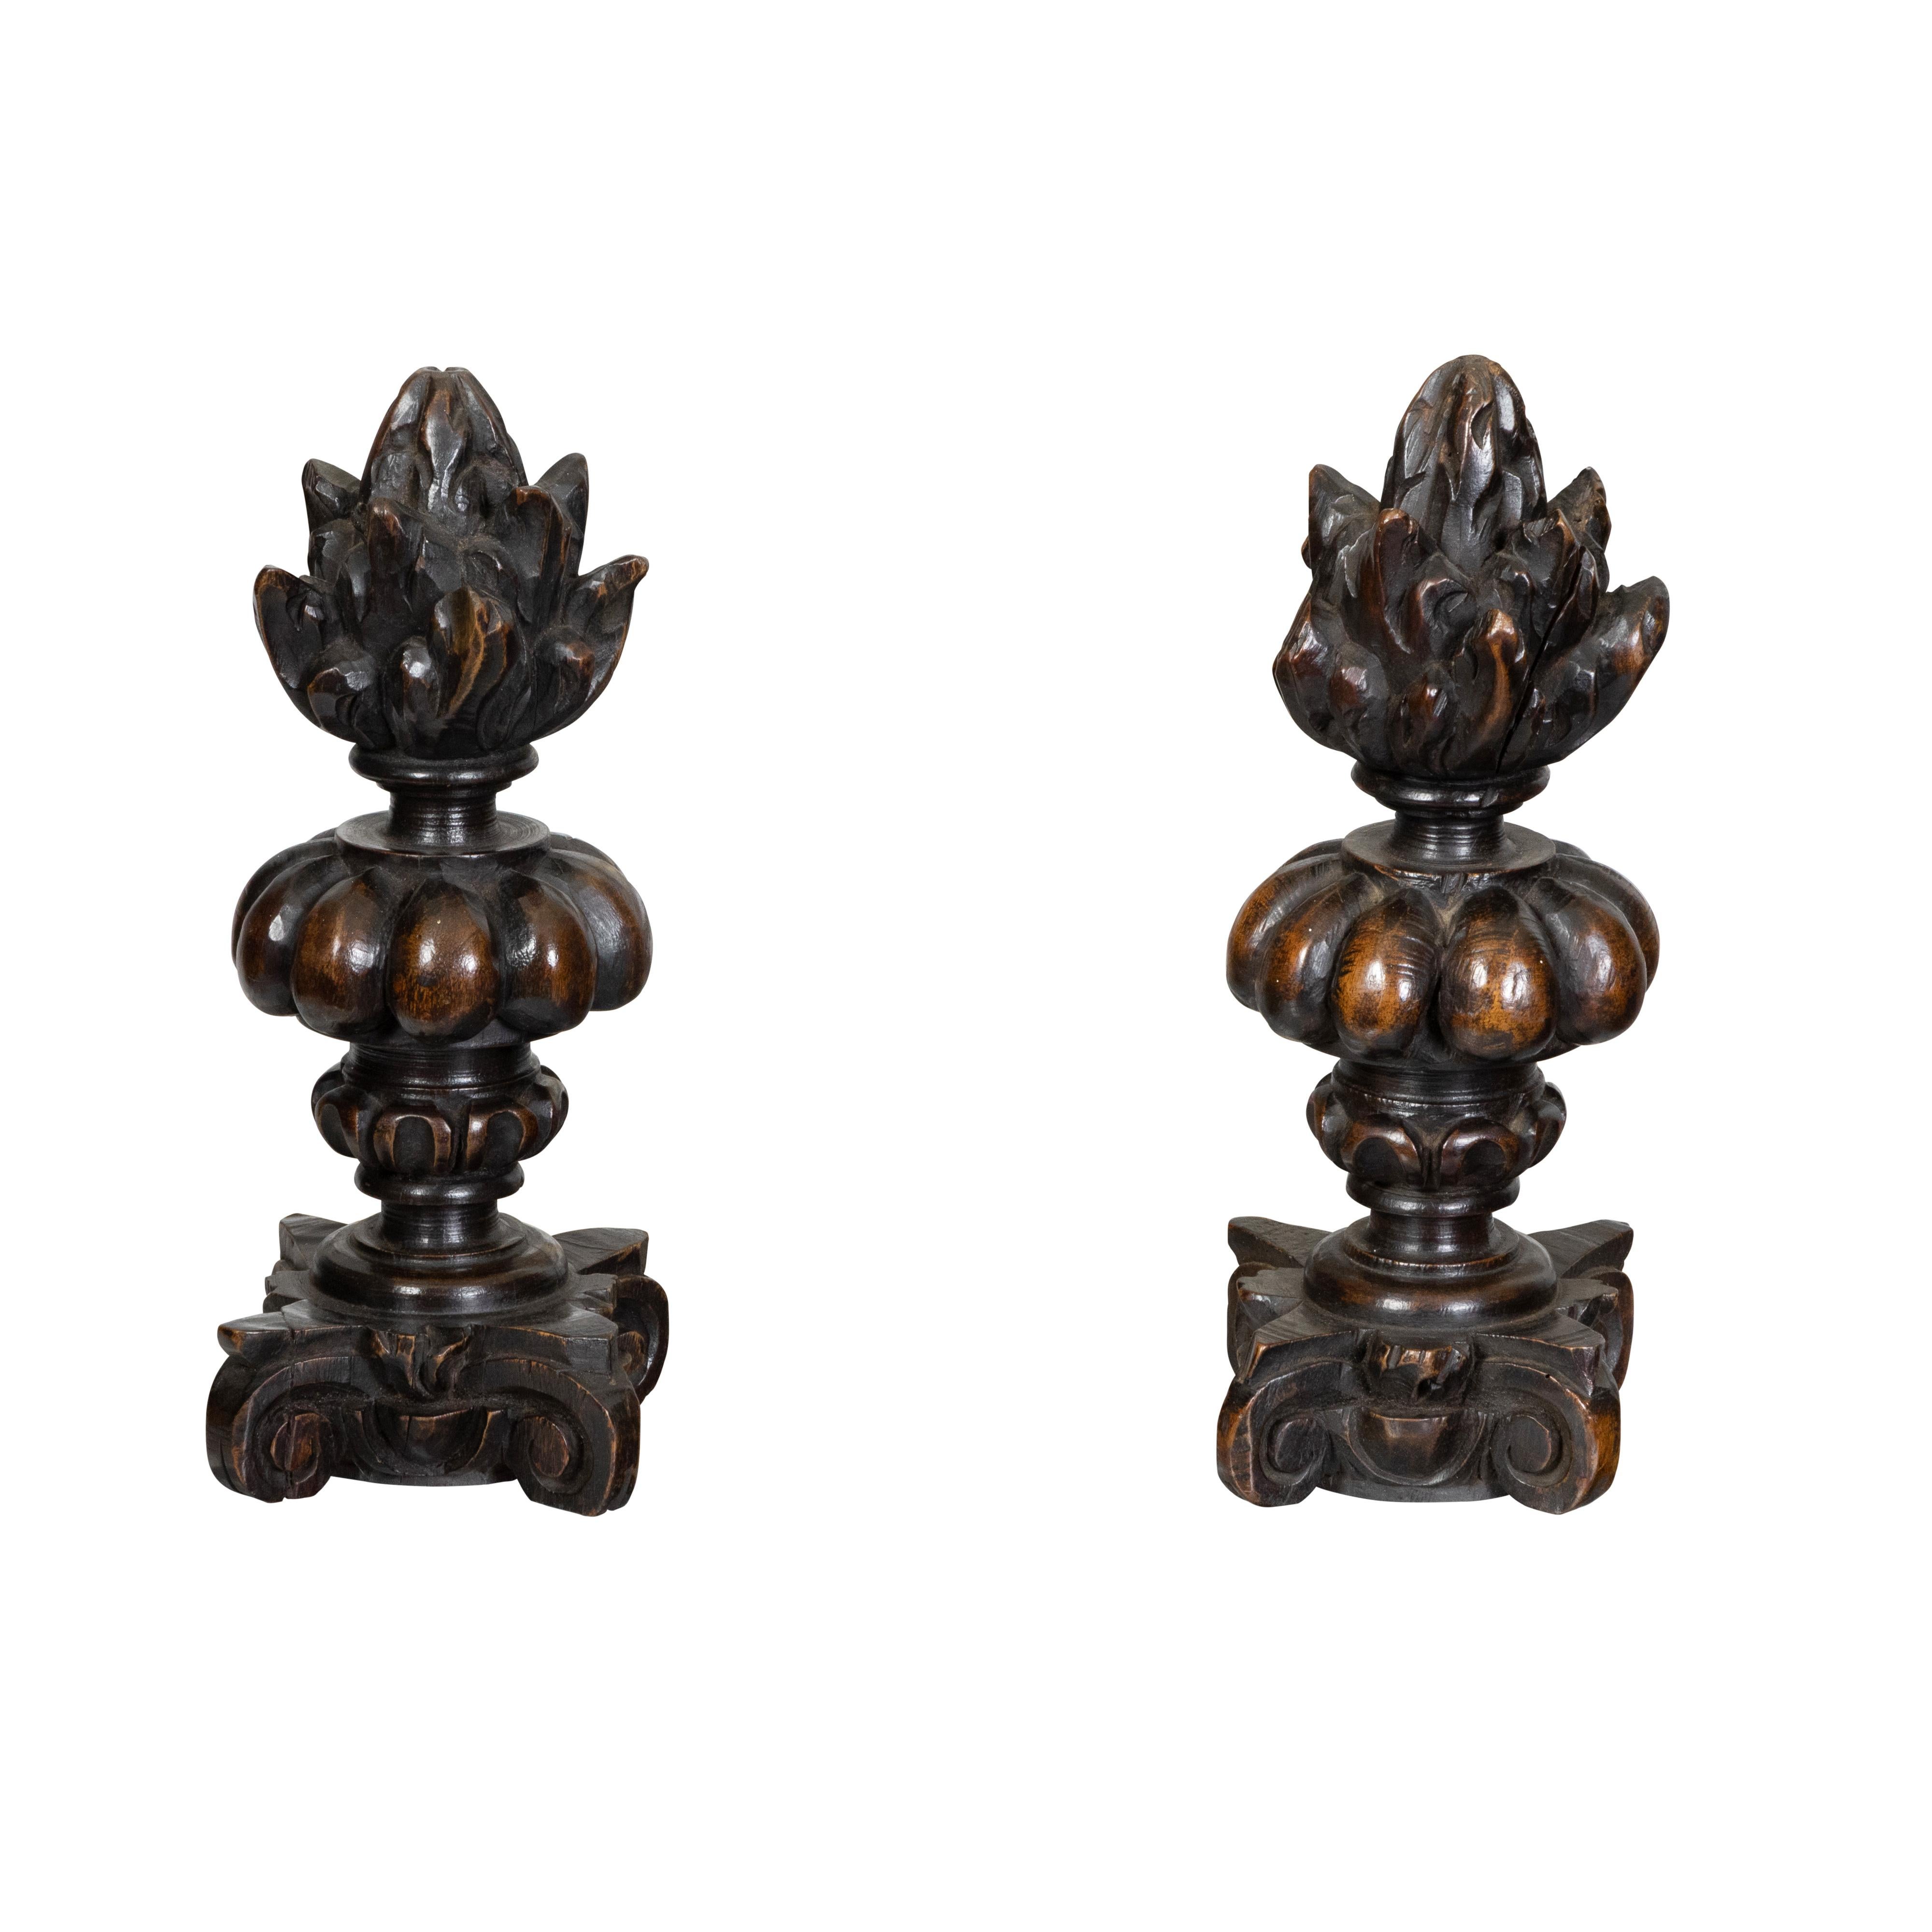 Pair of 19th Century Carved Wooden Italian Pot à Feu Sculptures on Lucite Bases For Sale